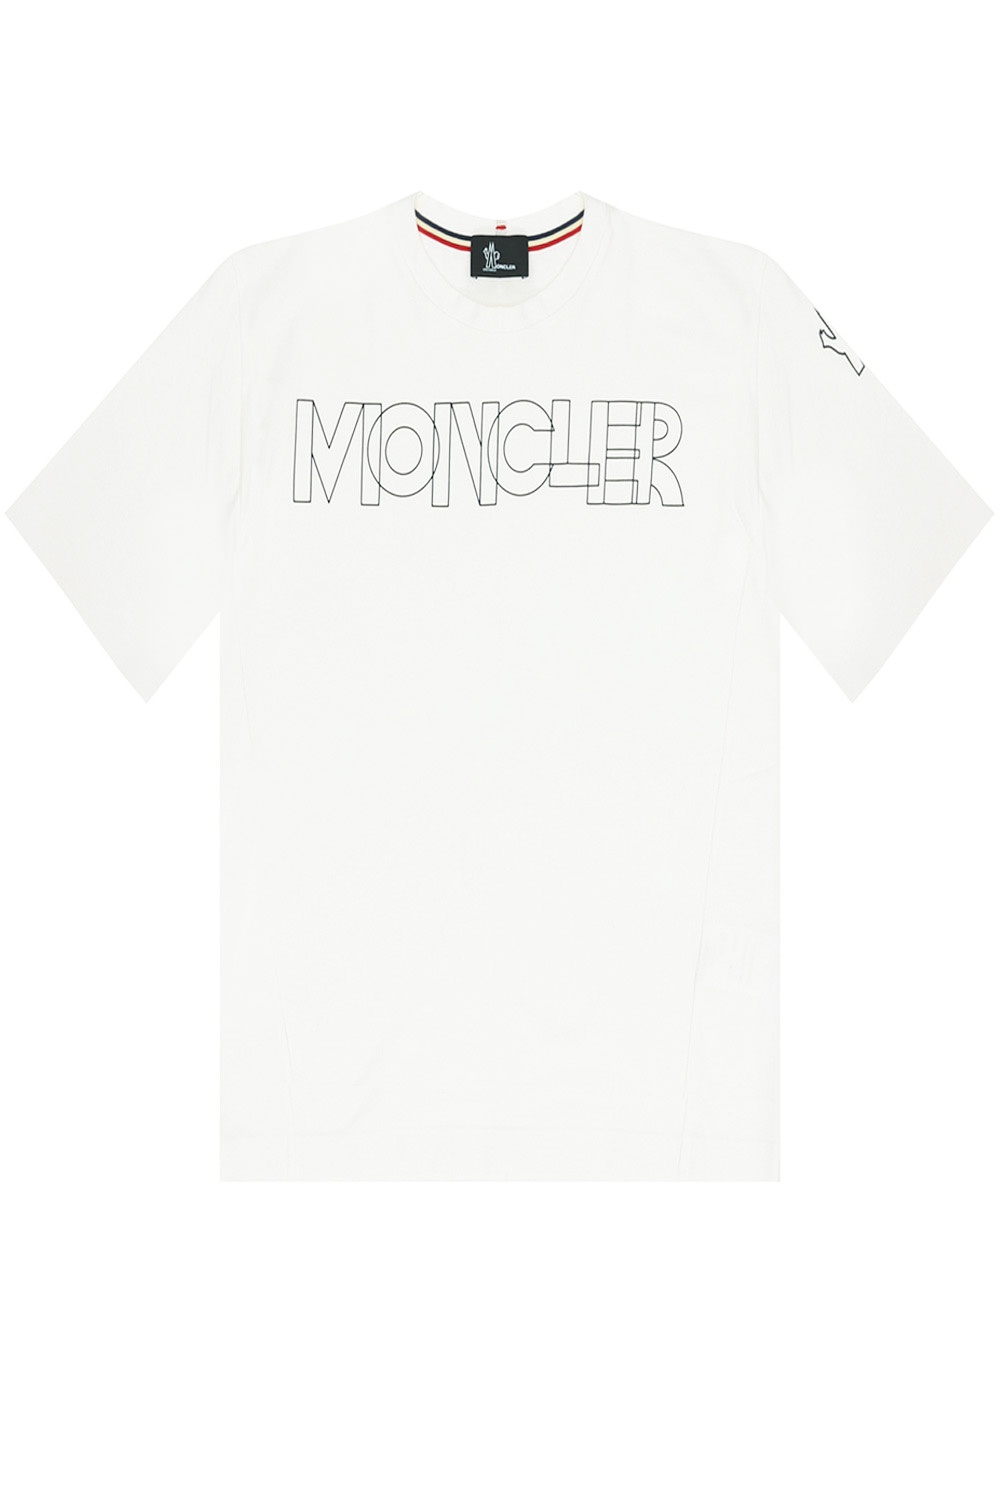 Moncler Grenoble T-shirt with logo